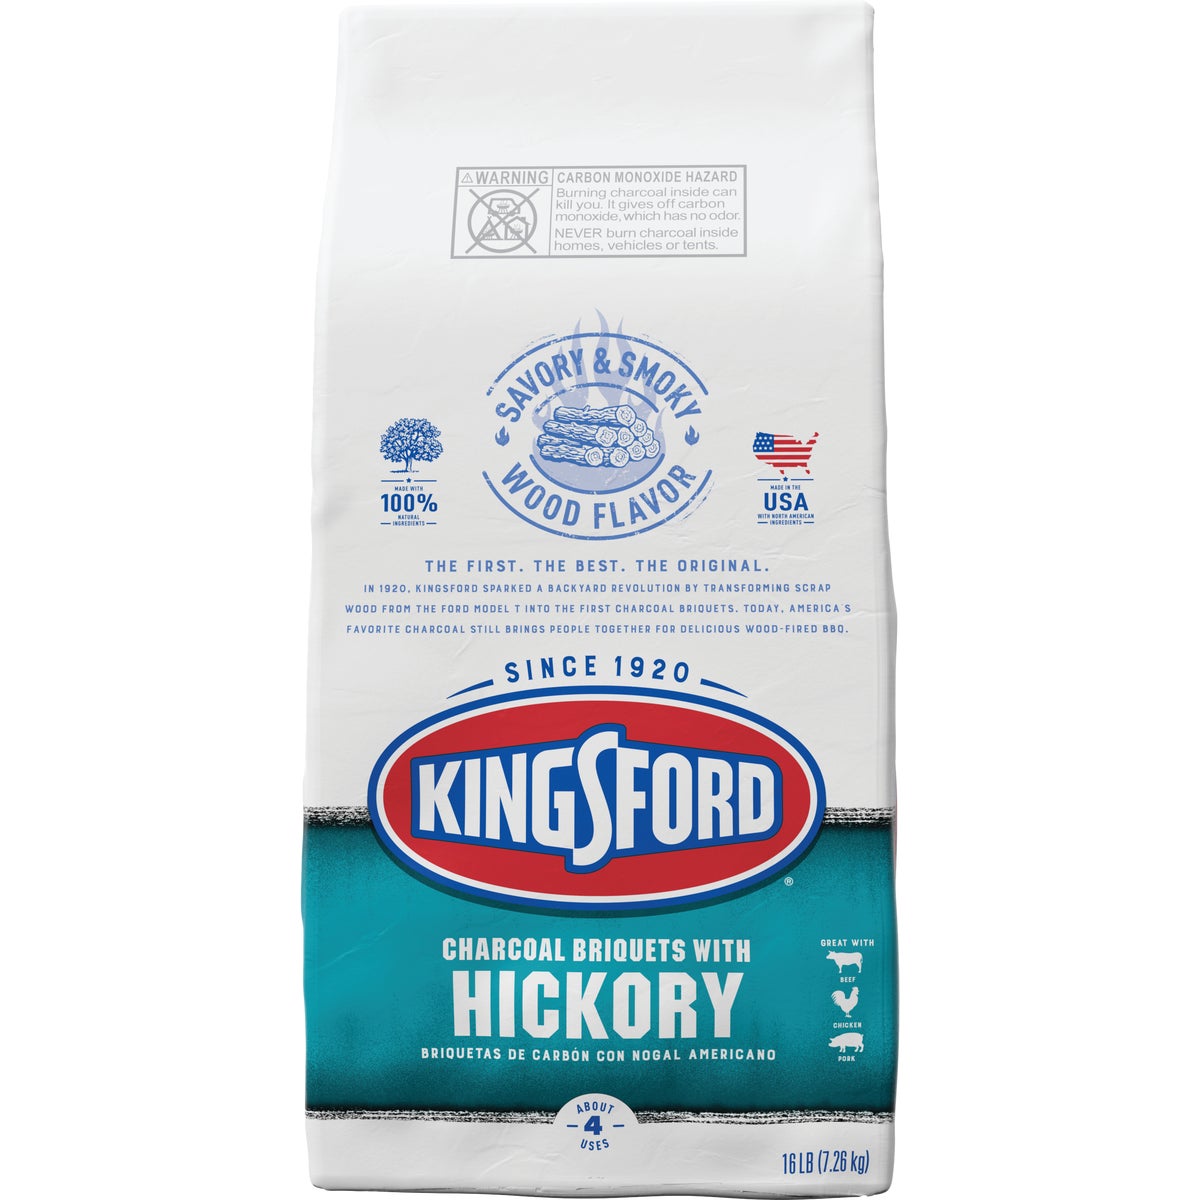 Item 887139, Kingsford Hickory charcoal briquets add popular hickory flavor to the 